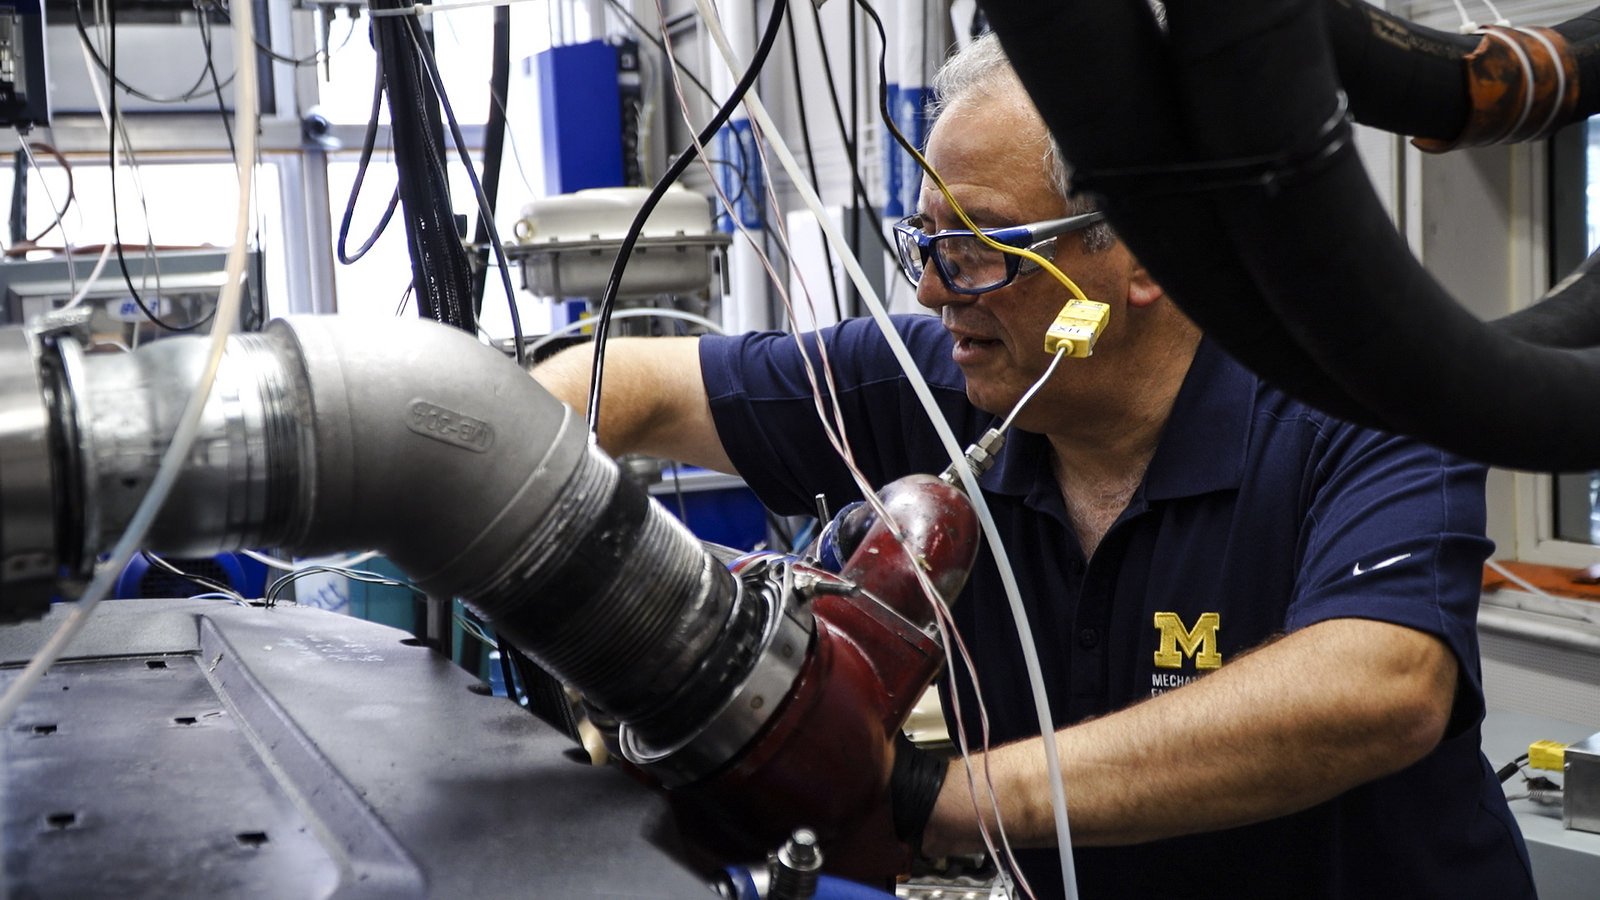 Andre Boehman, professor of mechanical engineering and director of the Walter E. Lay Automotive Laboratory at the University of Michigan, works on a heavy duty single cylinder engine in the auto lab. Image credit: Evan Dougherty, Michigan Engineering